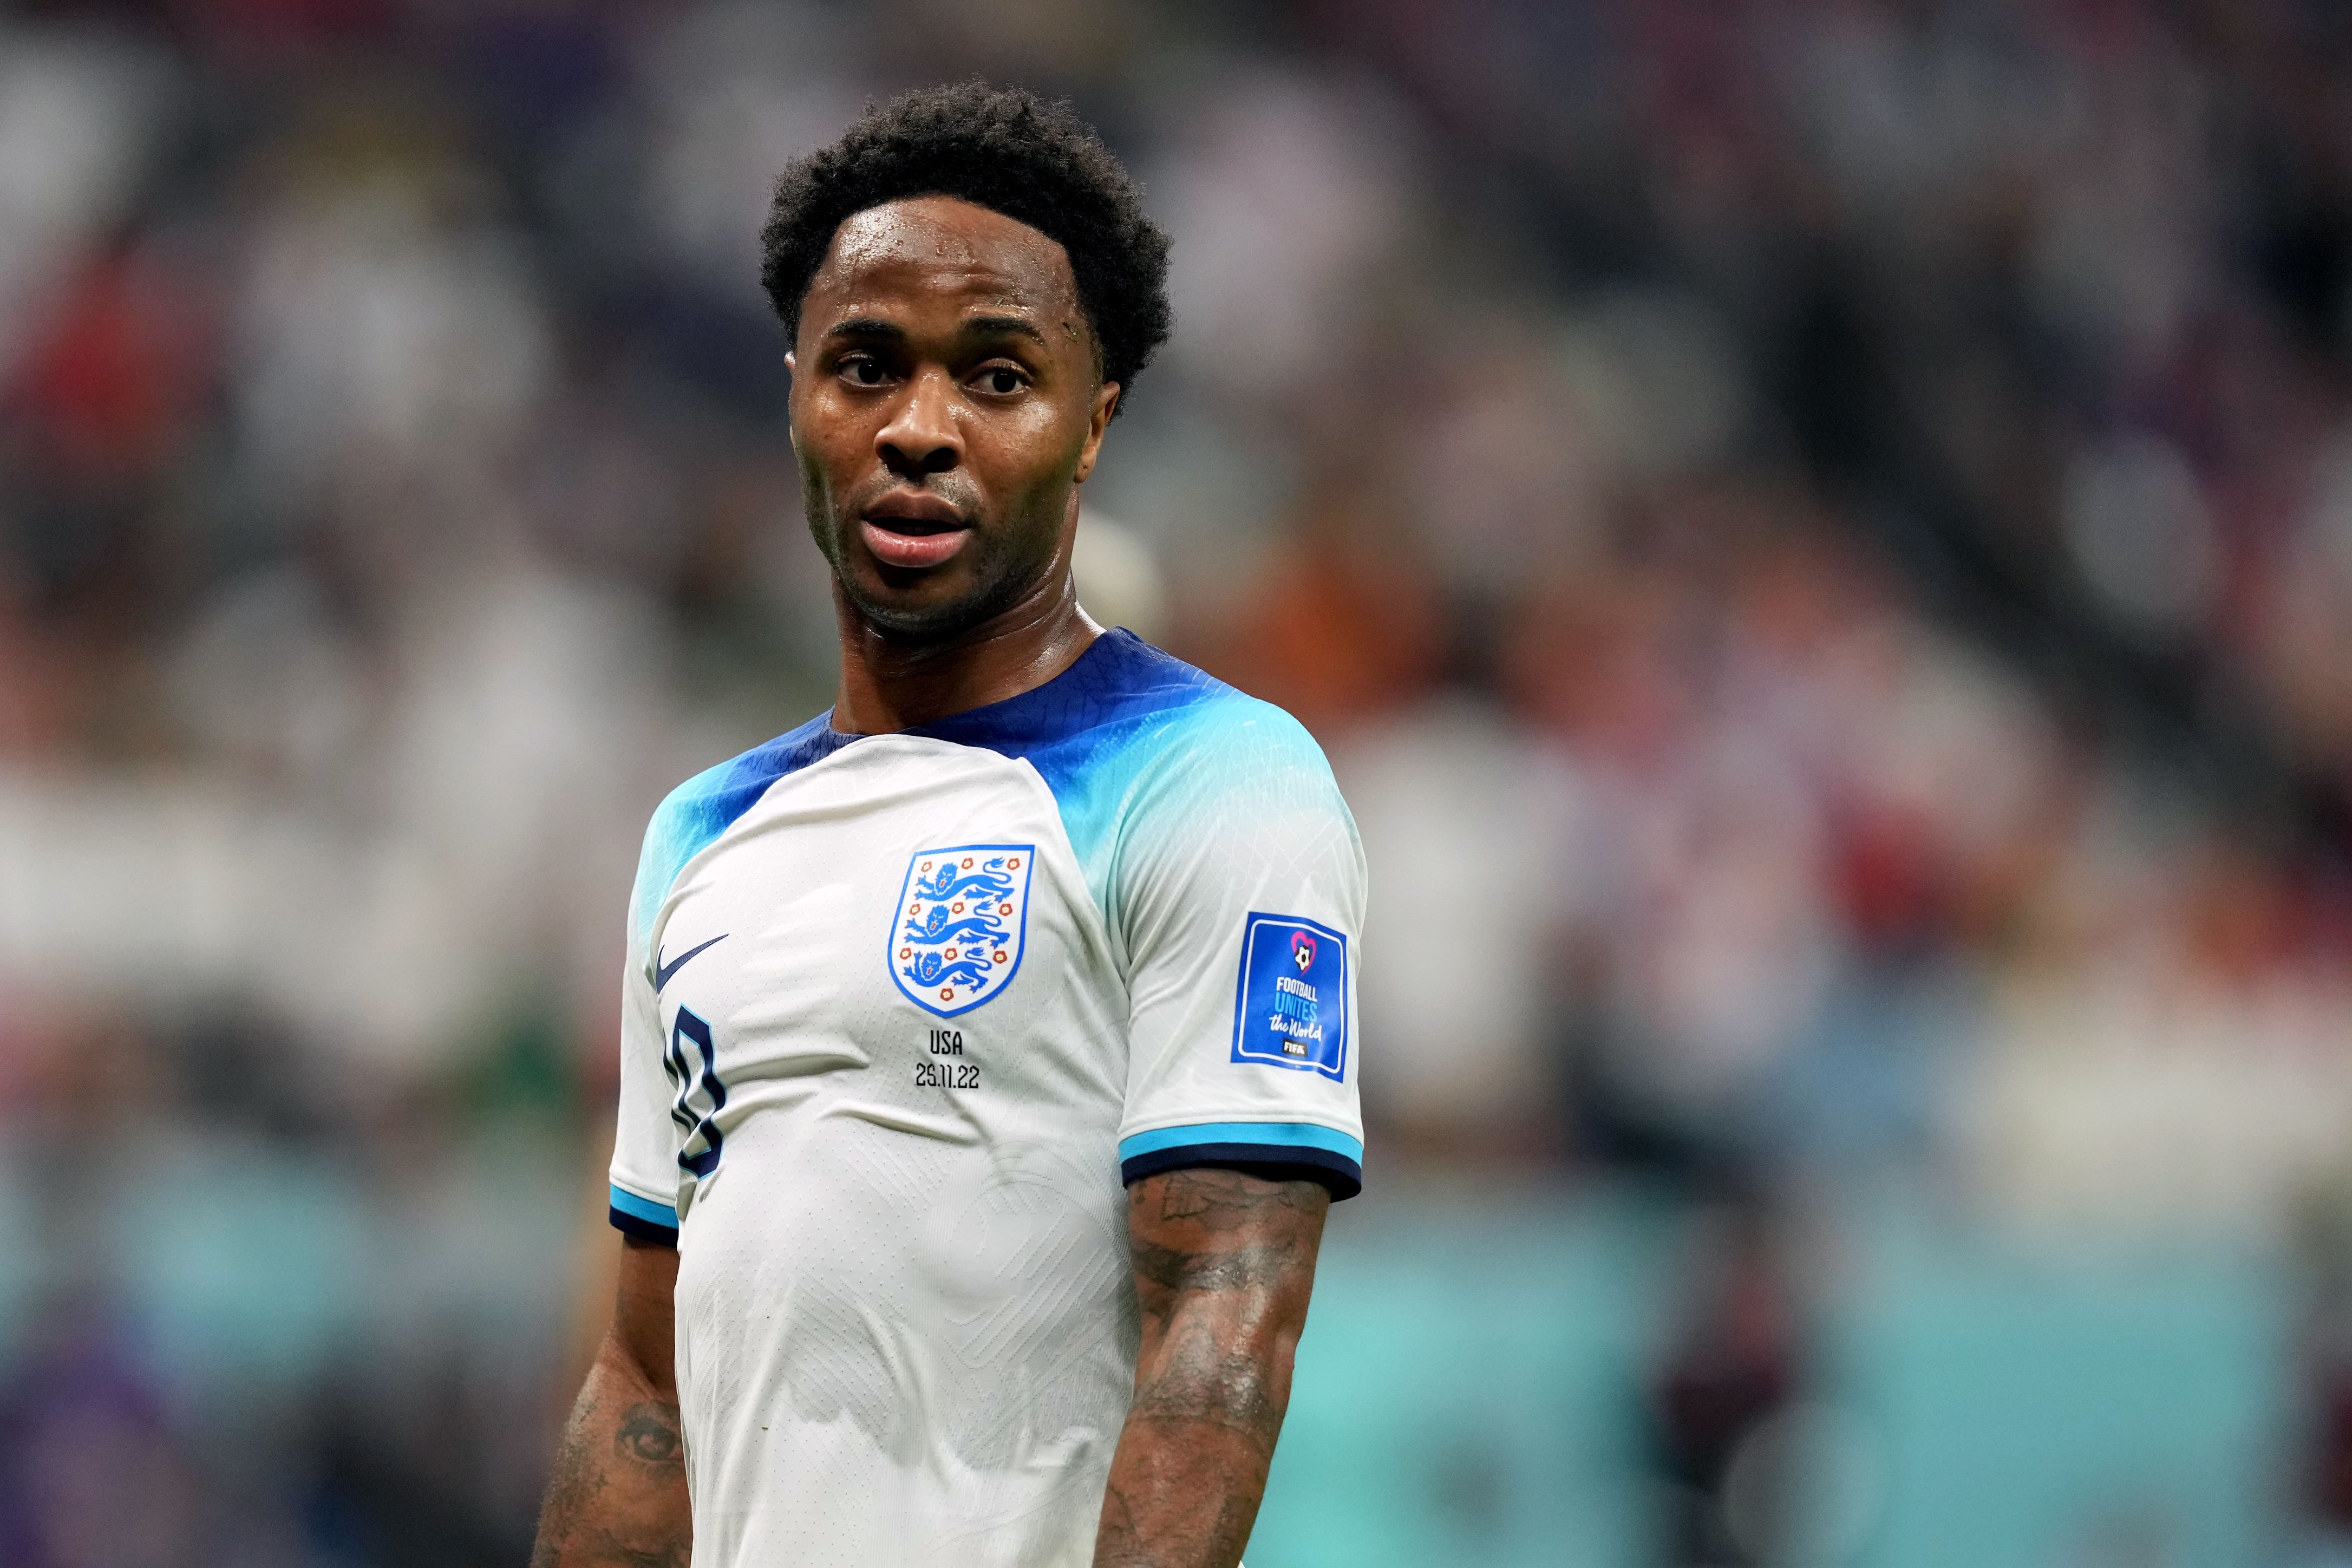 Police are investigating a report of a burglary at the home of England star Raheem Sterling